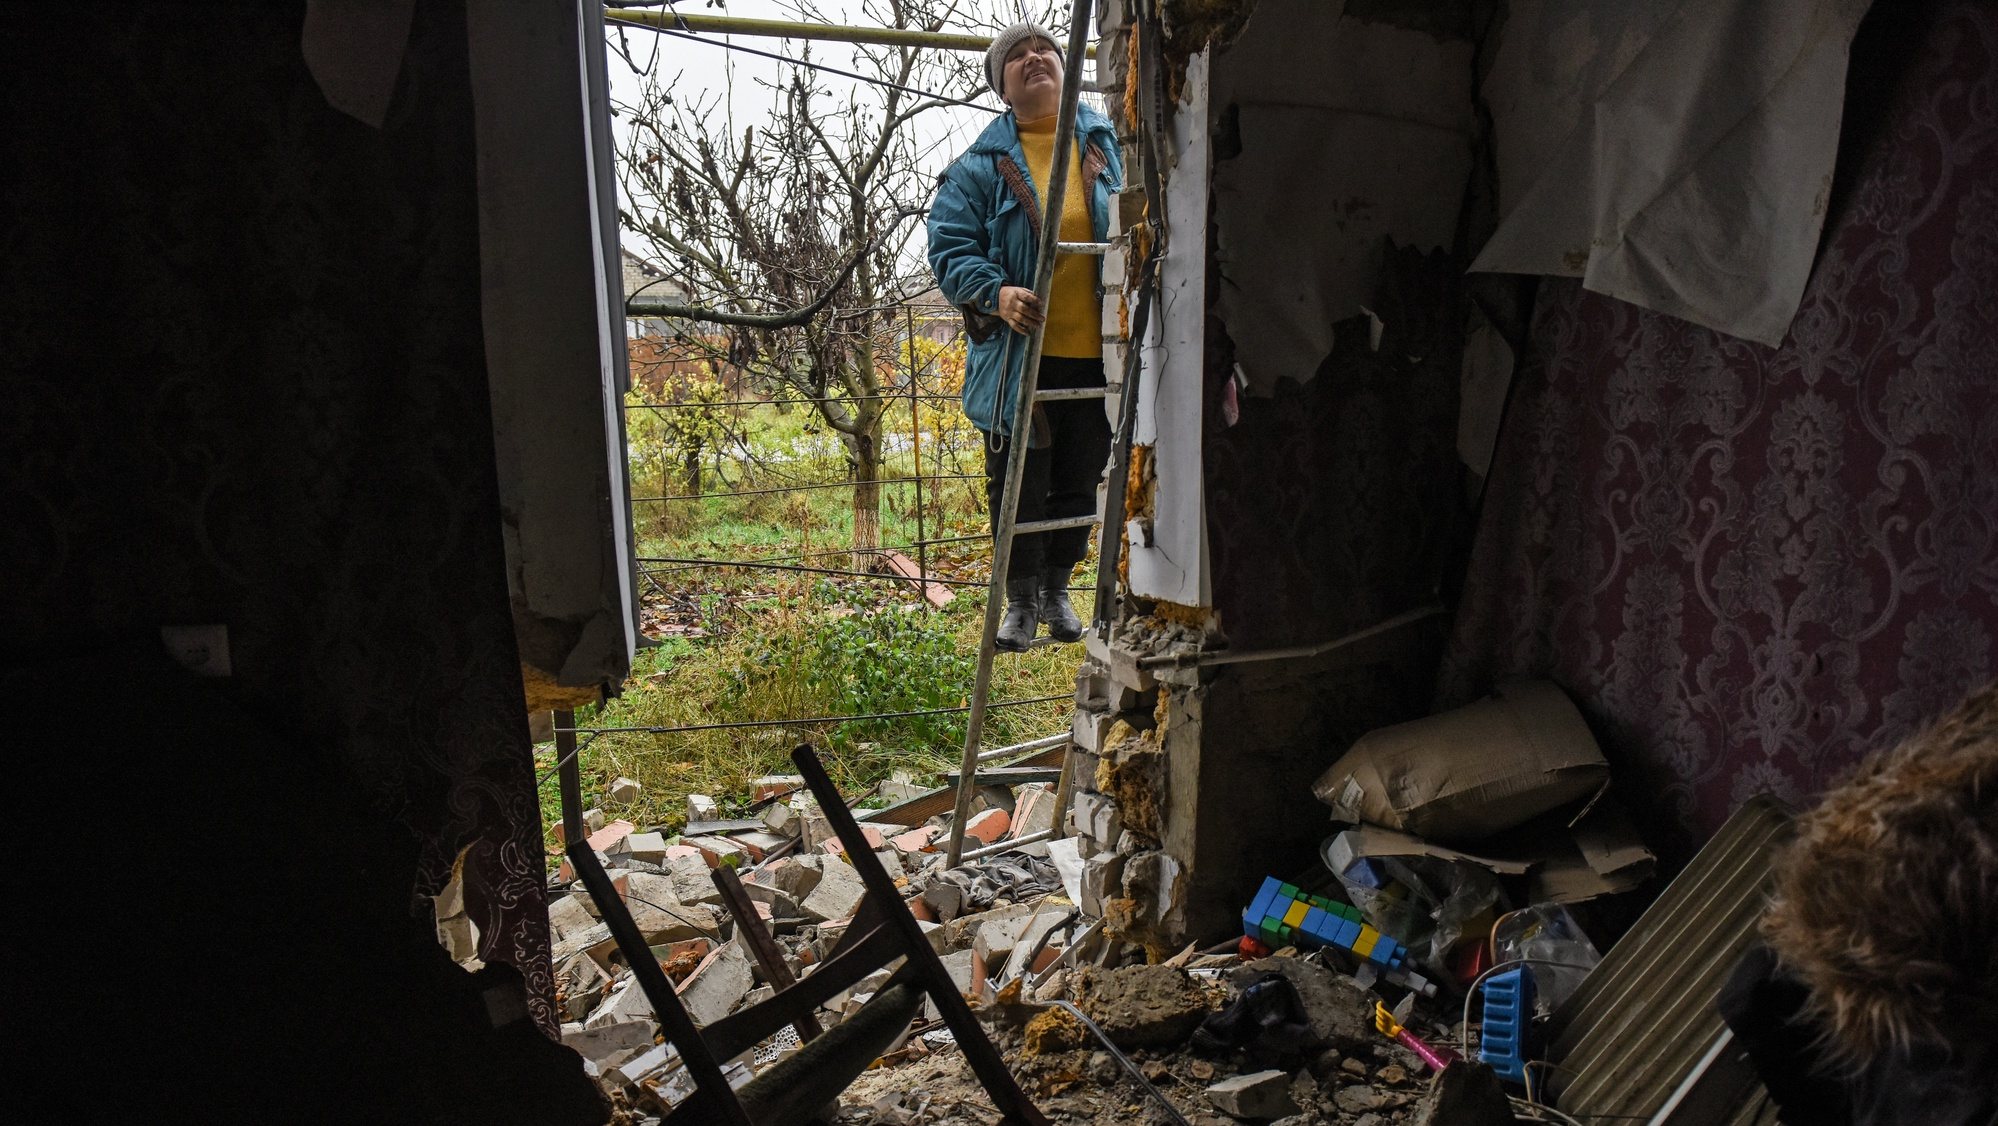 epa10316222 Svitlana repairs damages at her house in Posad-Pokrovske village, Kherson region, Ukraine, 20 November 2022. Ukrainian troops entered Kherson city on 11 November after Russian troops had withdrawn from the city. Kherson was captured in the early stage of the conflict, shortly after Russian troops had entered Ukraine in February 2022.  EPA/OLEG PETRASYUK